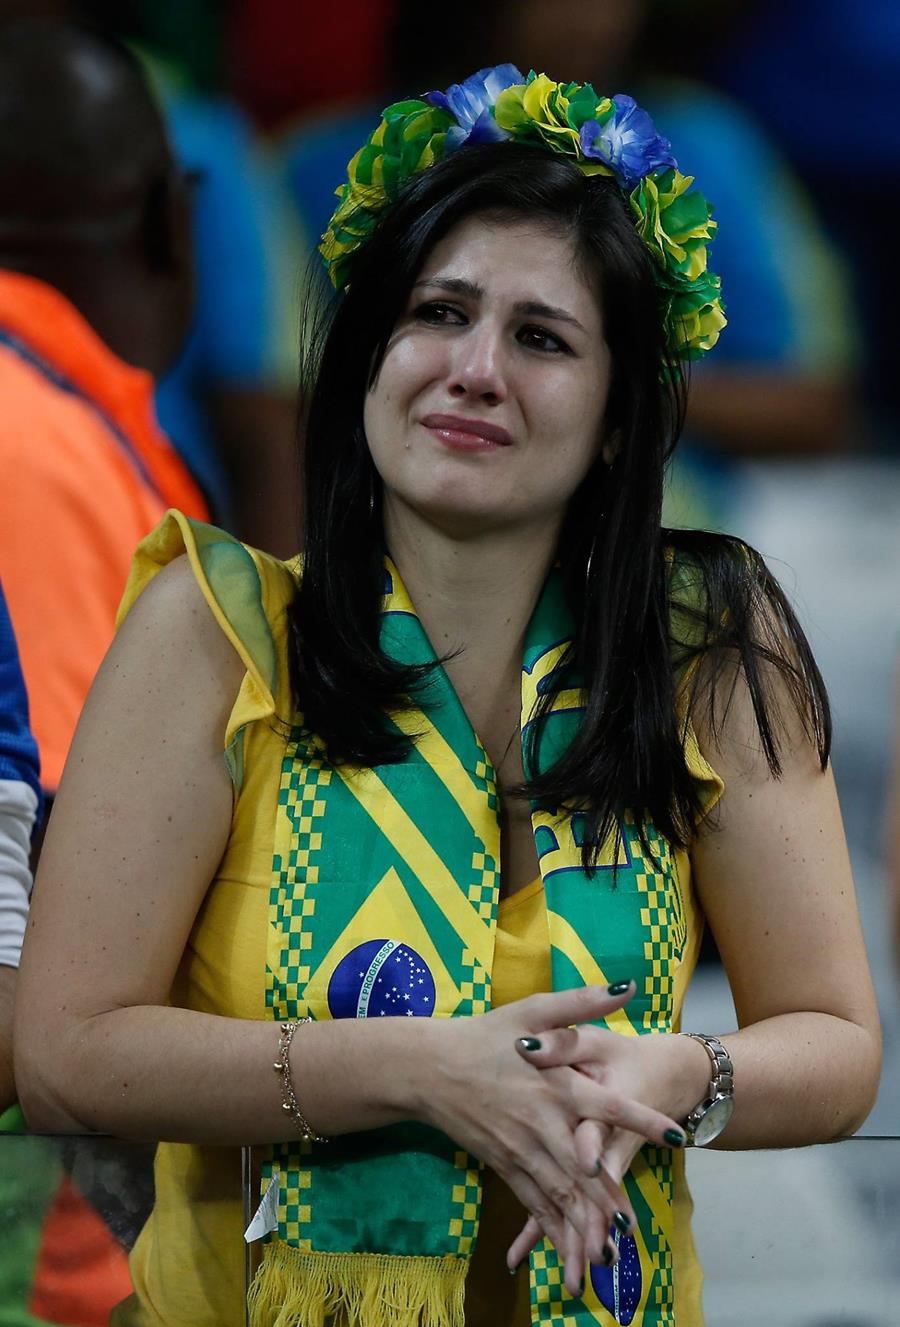 Crying Faces of Brazil After FIFA Semi Final 2014 - XciteFun.net